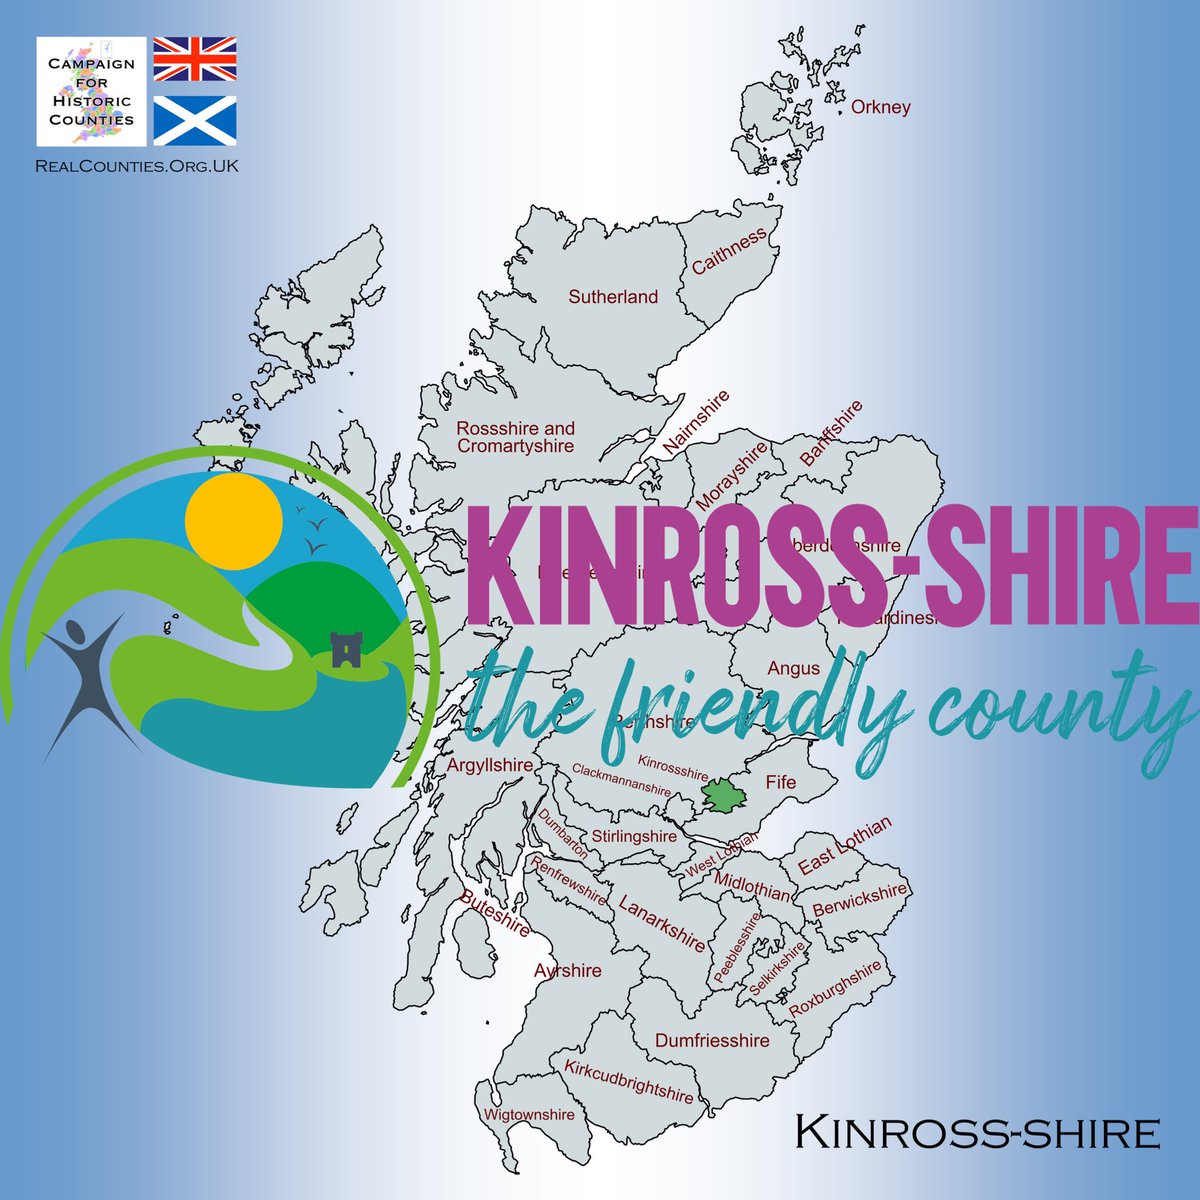 “The County of Kinross - a brief History and Geography of Kinross-shire.” Watch our latest @YouTube video and subscribe to our channel now: youtu.be/AaSxJgniXdg?fe… 🇬🇧 #HistoricCounties | #RealCounties 🏴󠁧󠁢󠁳󠁣󠁴󠁿